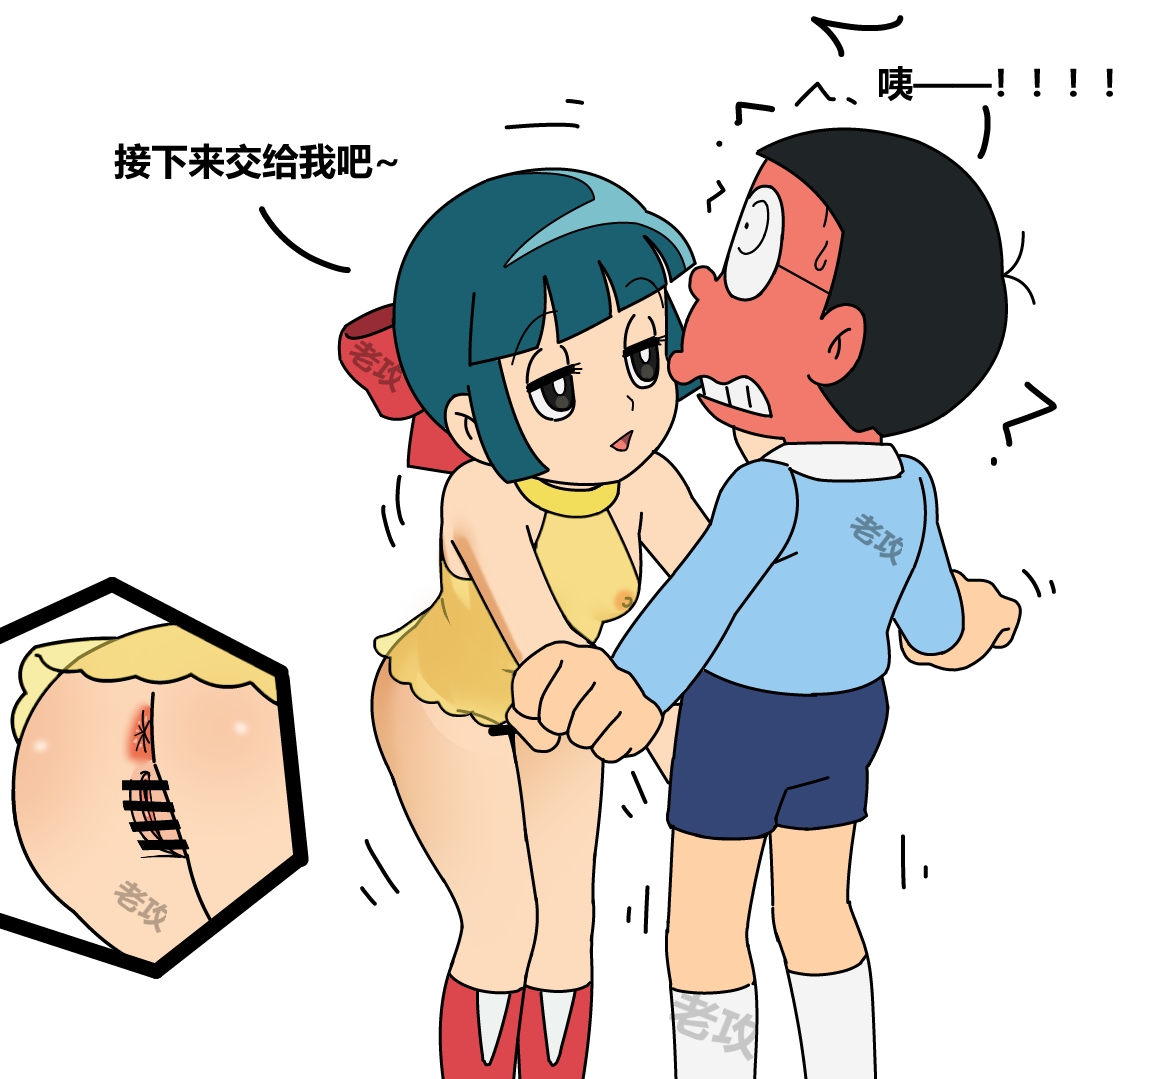 [Lao Gong] I Love Robot Girls (Part 1) (Doraemon) [Chinese] - Page 11